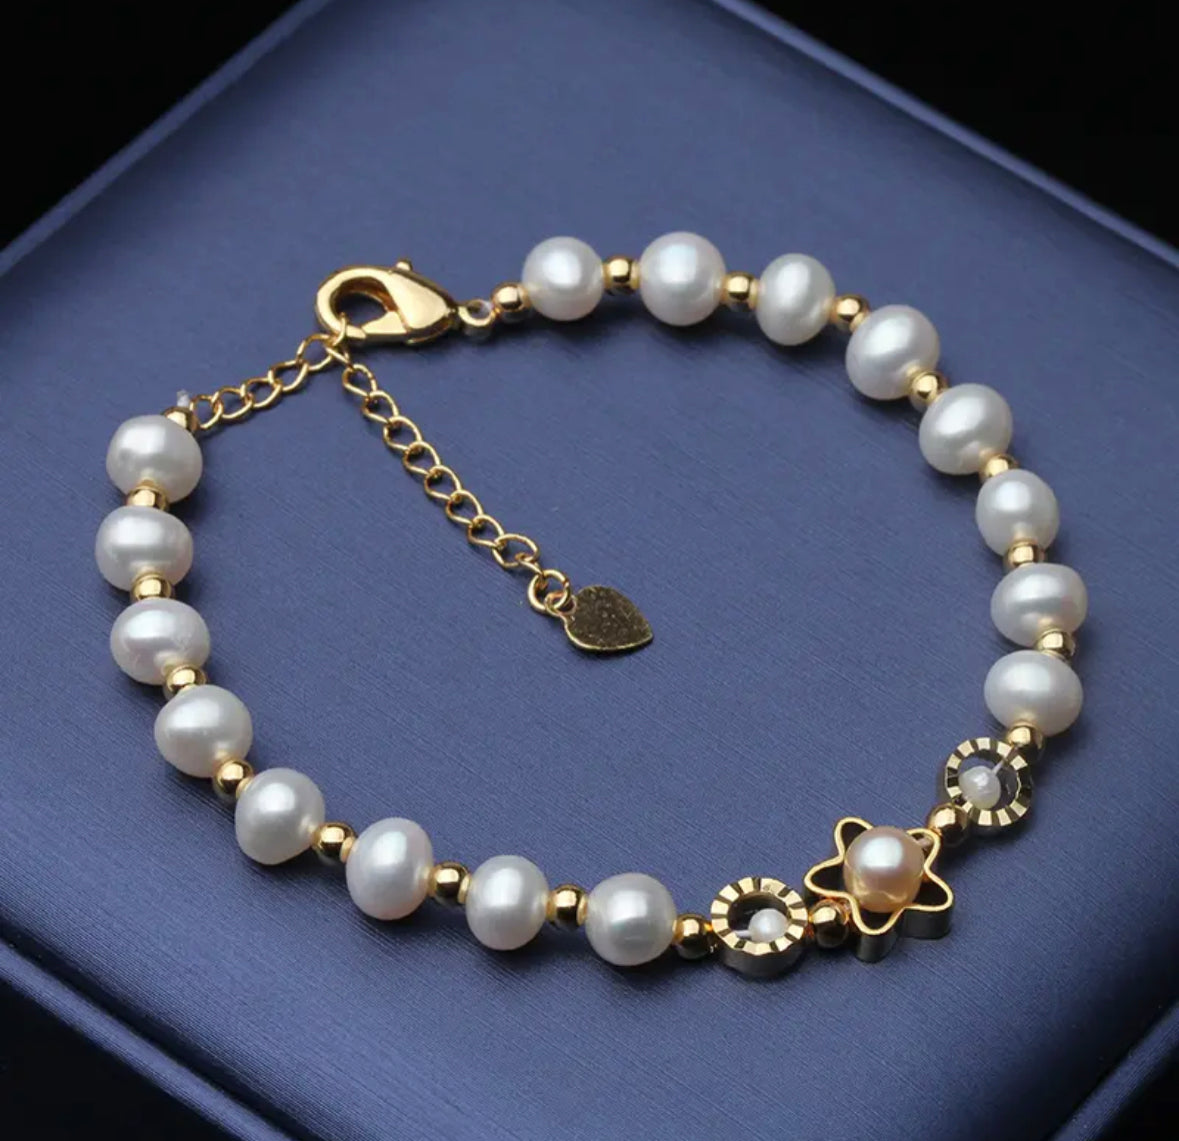 100% real freshwater round pearl bracelets.